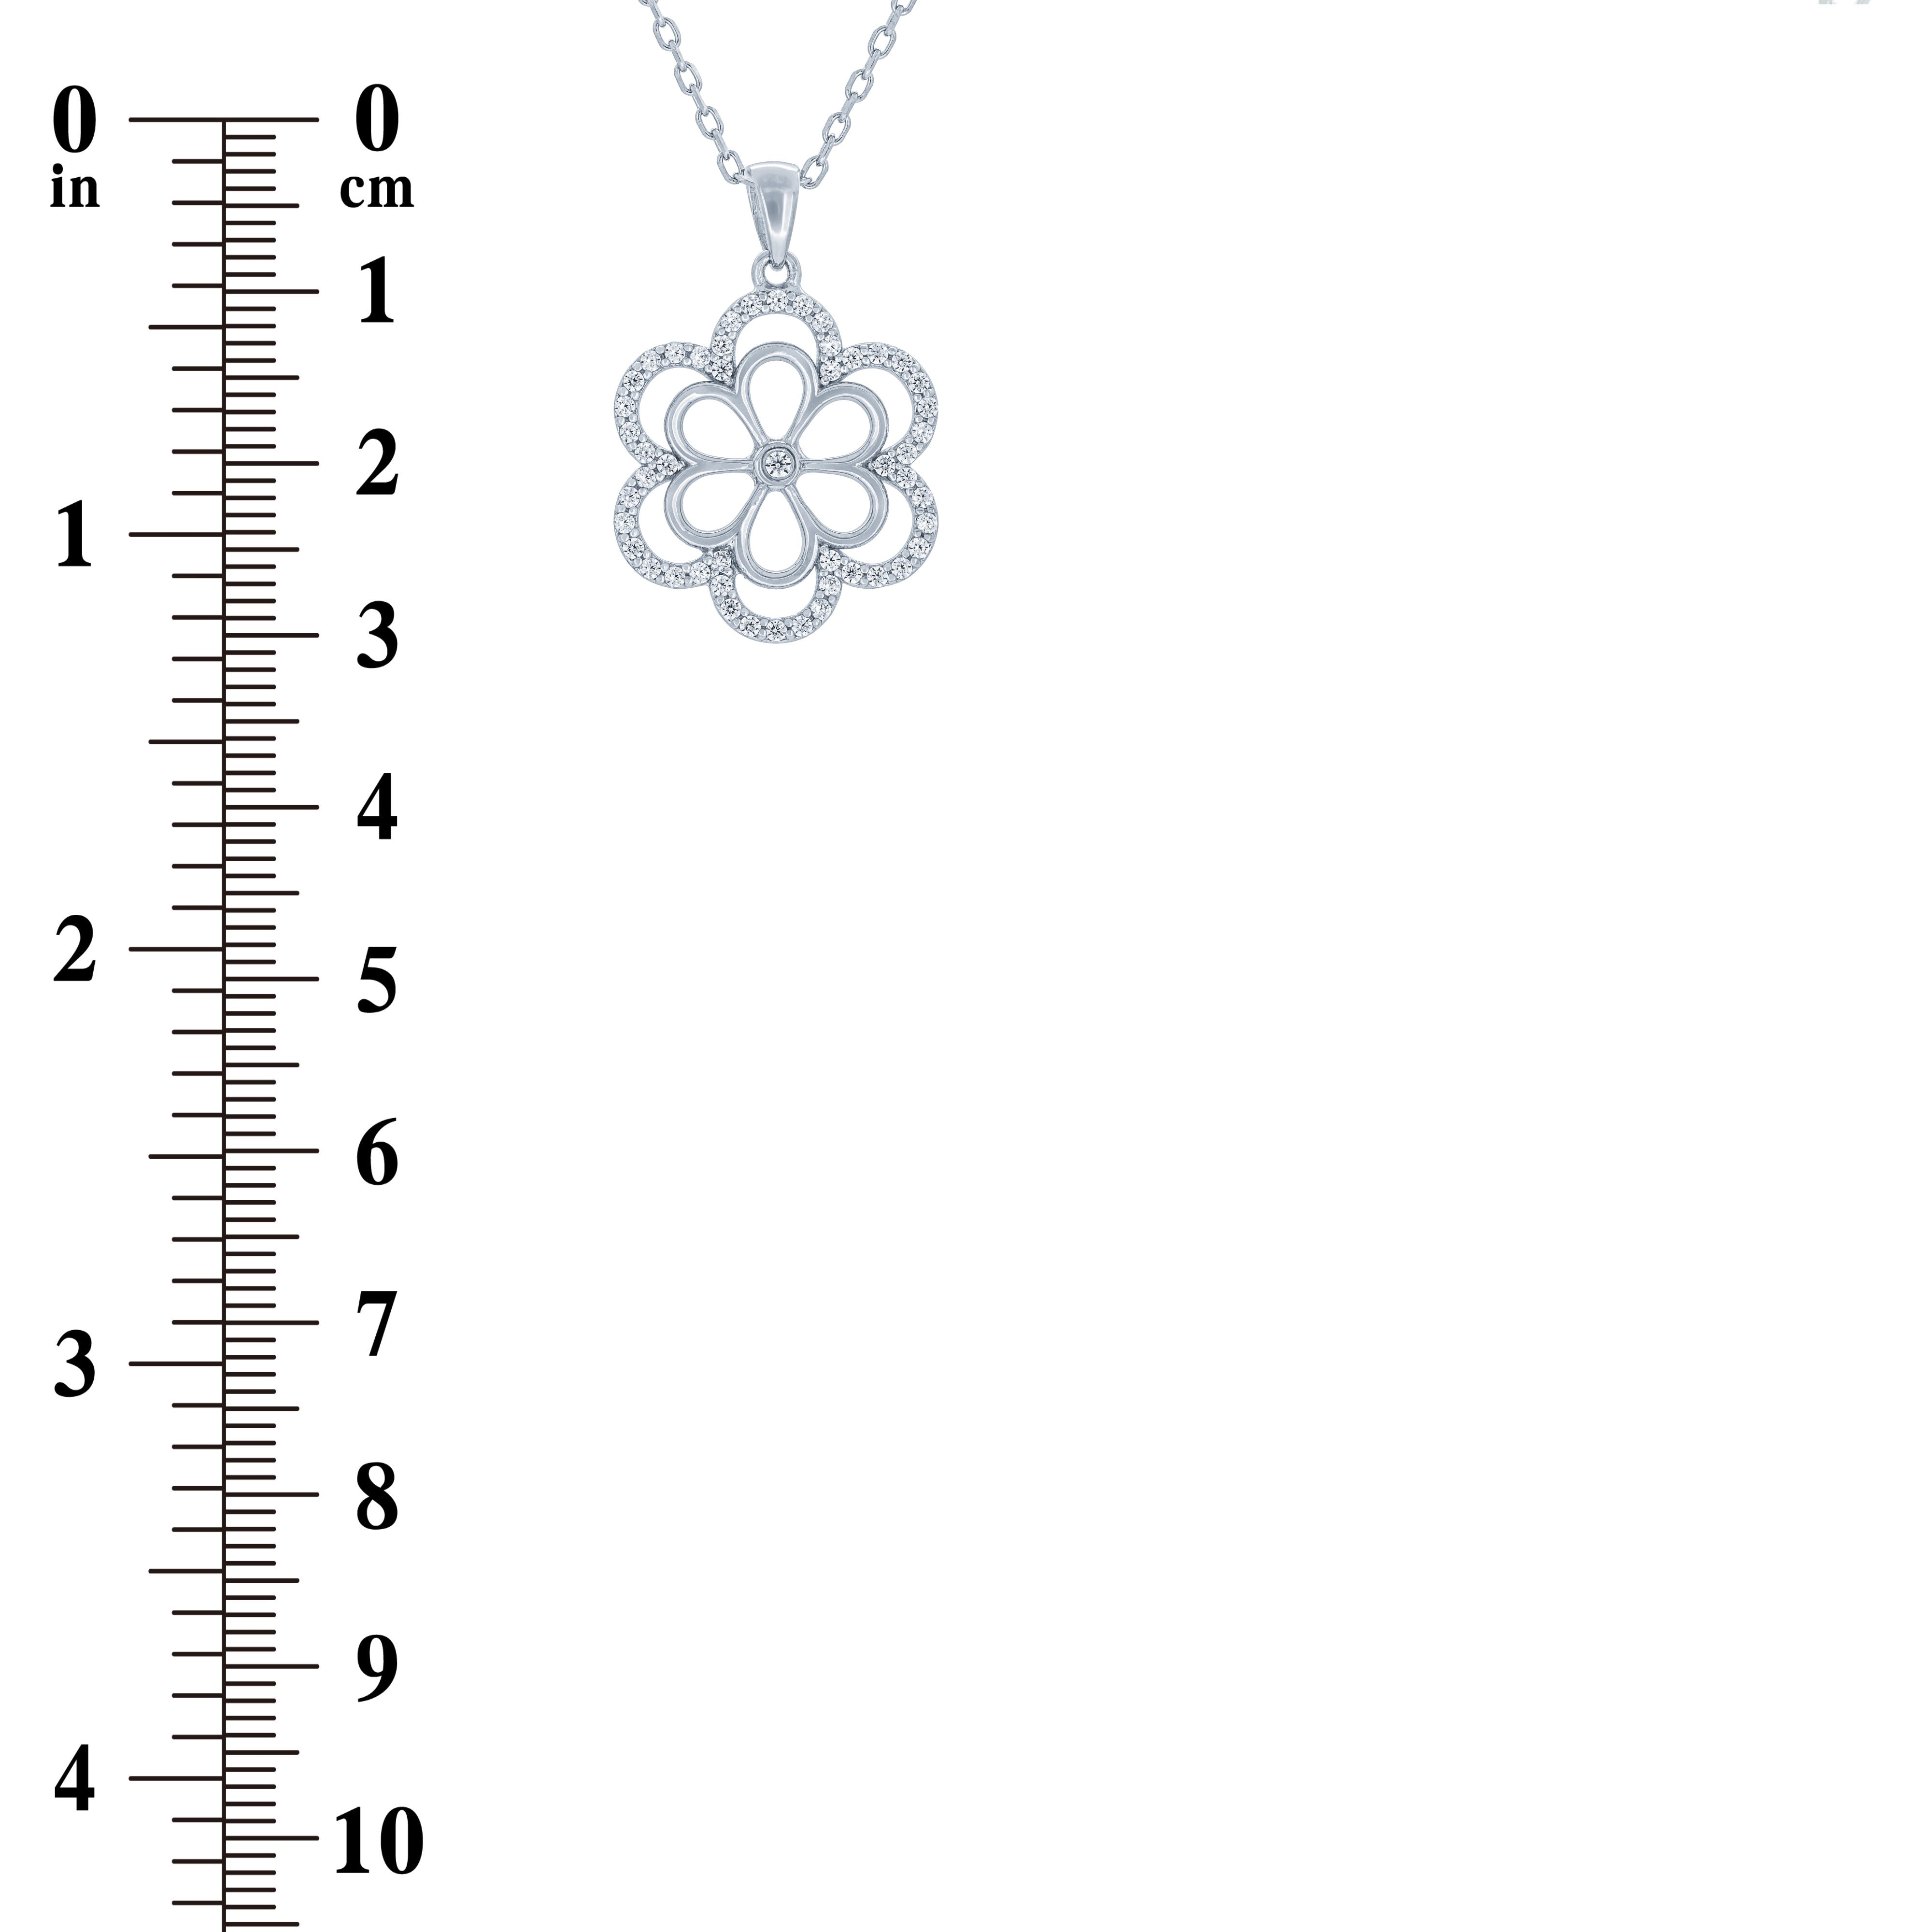 (100049) White Cubic Zirconia Flower Pendant Necklace In Sterling Silver